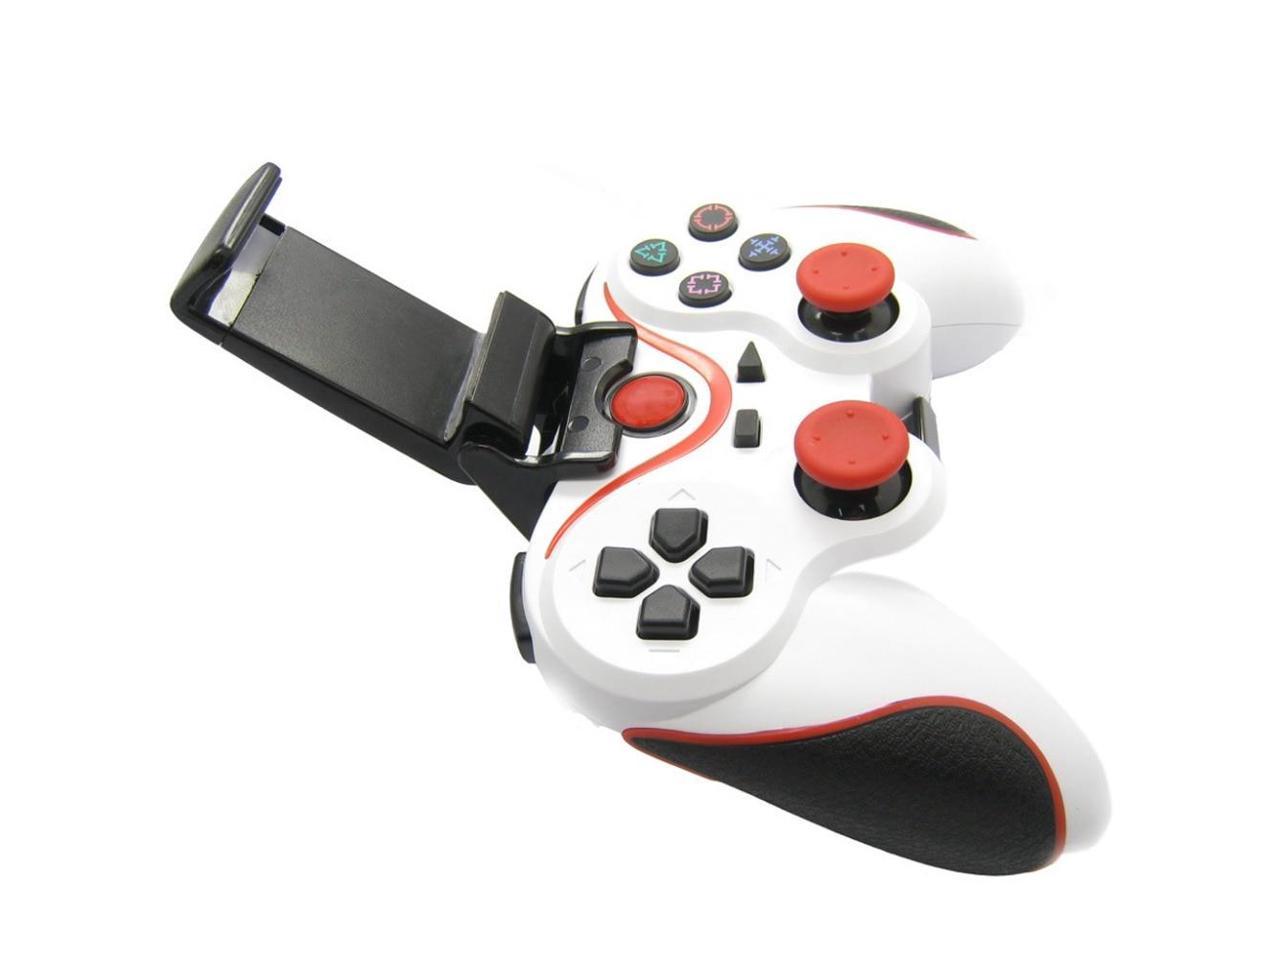 Stand Holder Mount Clip For PS3 Playstation 3 Xiaomi GamePad Game Controller